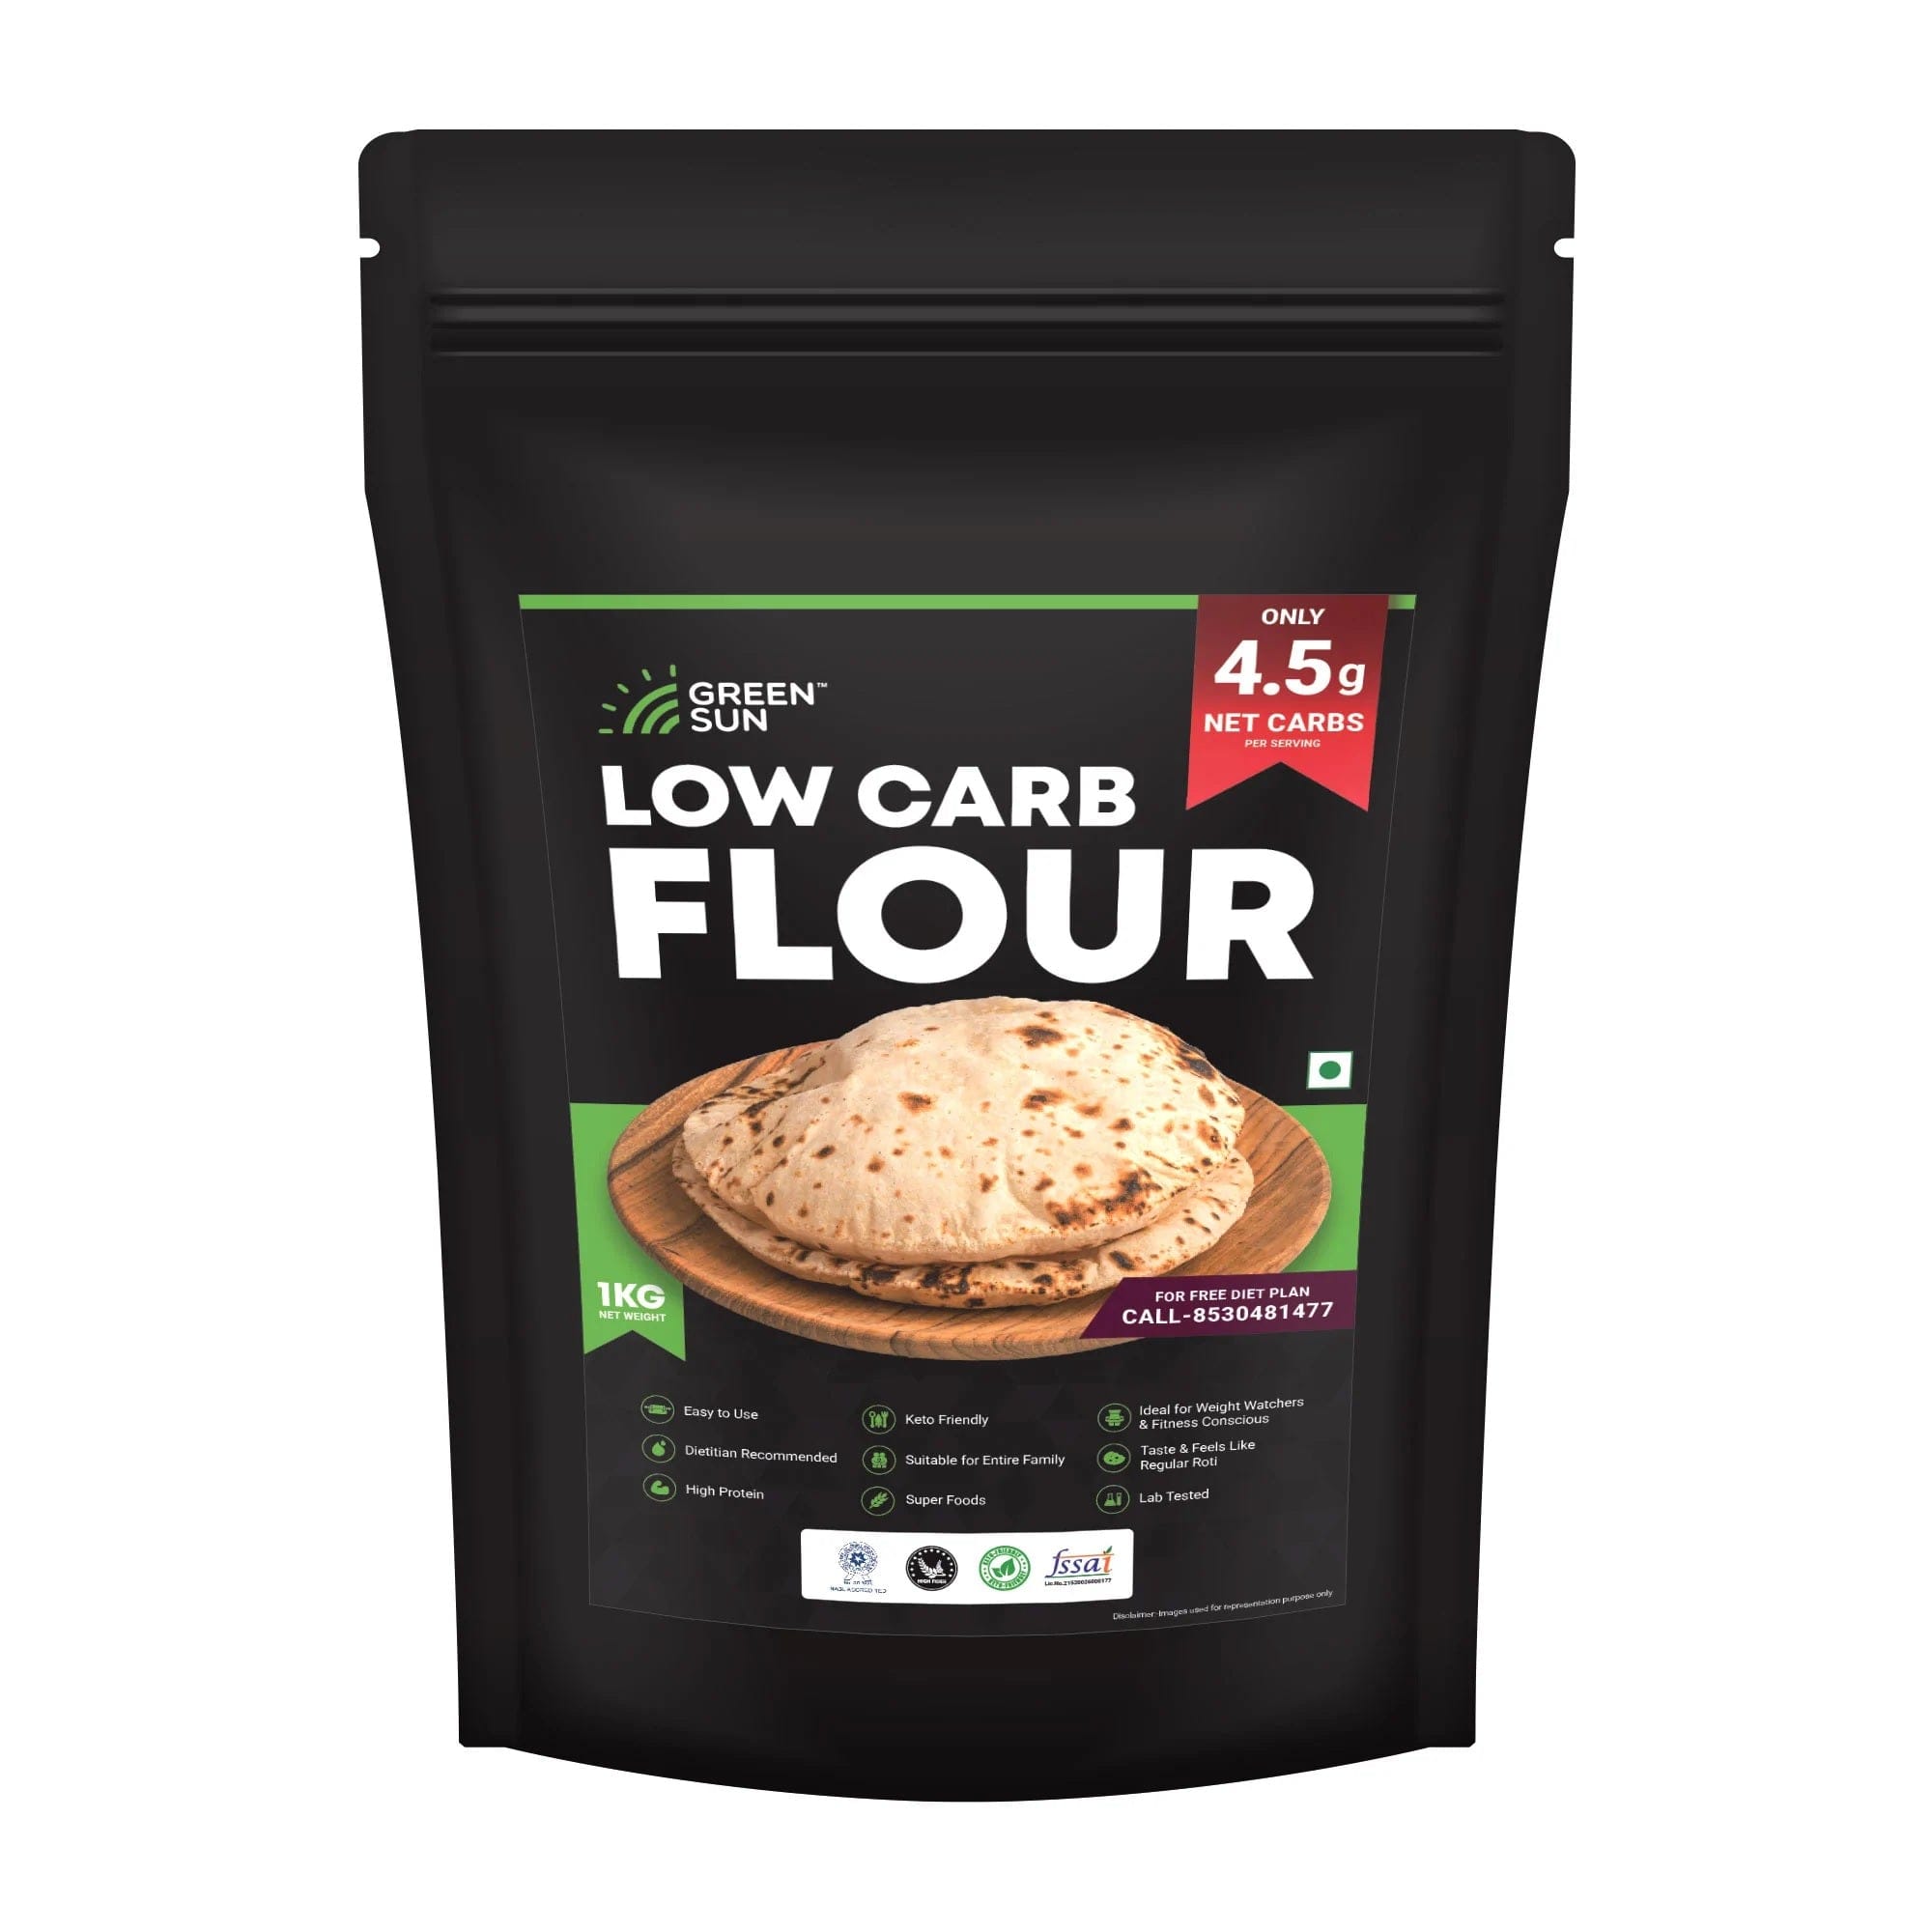 Green Sun Low Carb Flour 1 Kg Only 4.5 g Net Carbs Per Roti Tasty & Easy to Make Keto Friendly Healthy Atta High Fiber High Protein Super Foods Dietitian Recommended Weight watchers Fitness Conscious Family Atta